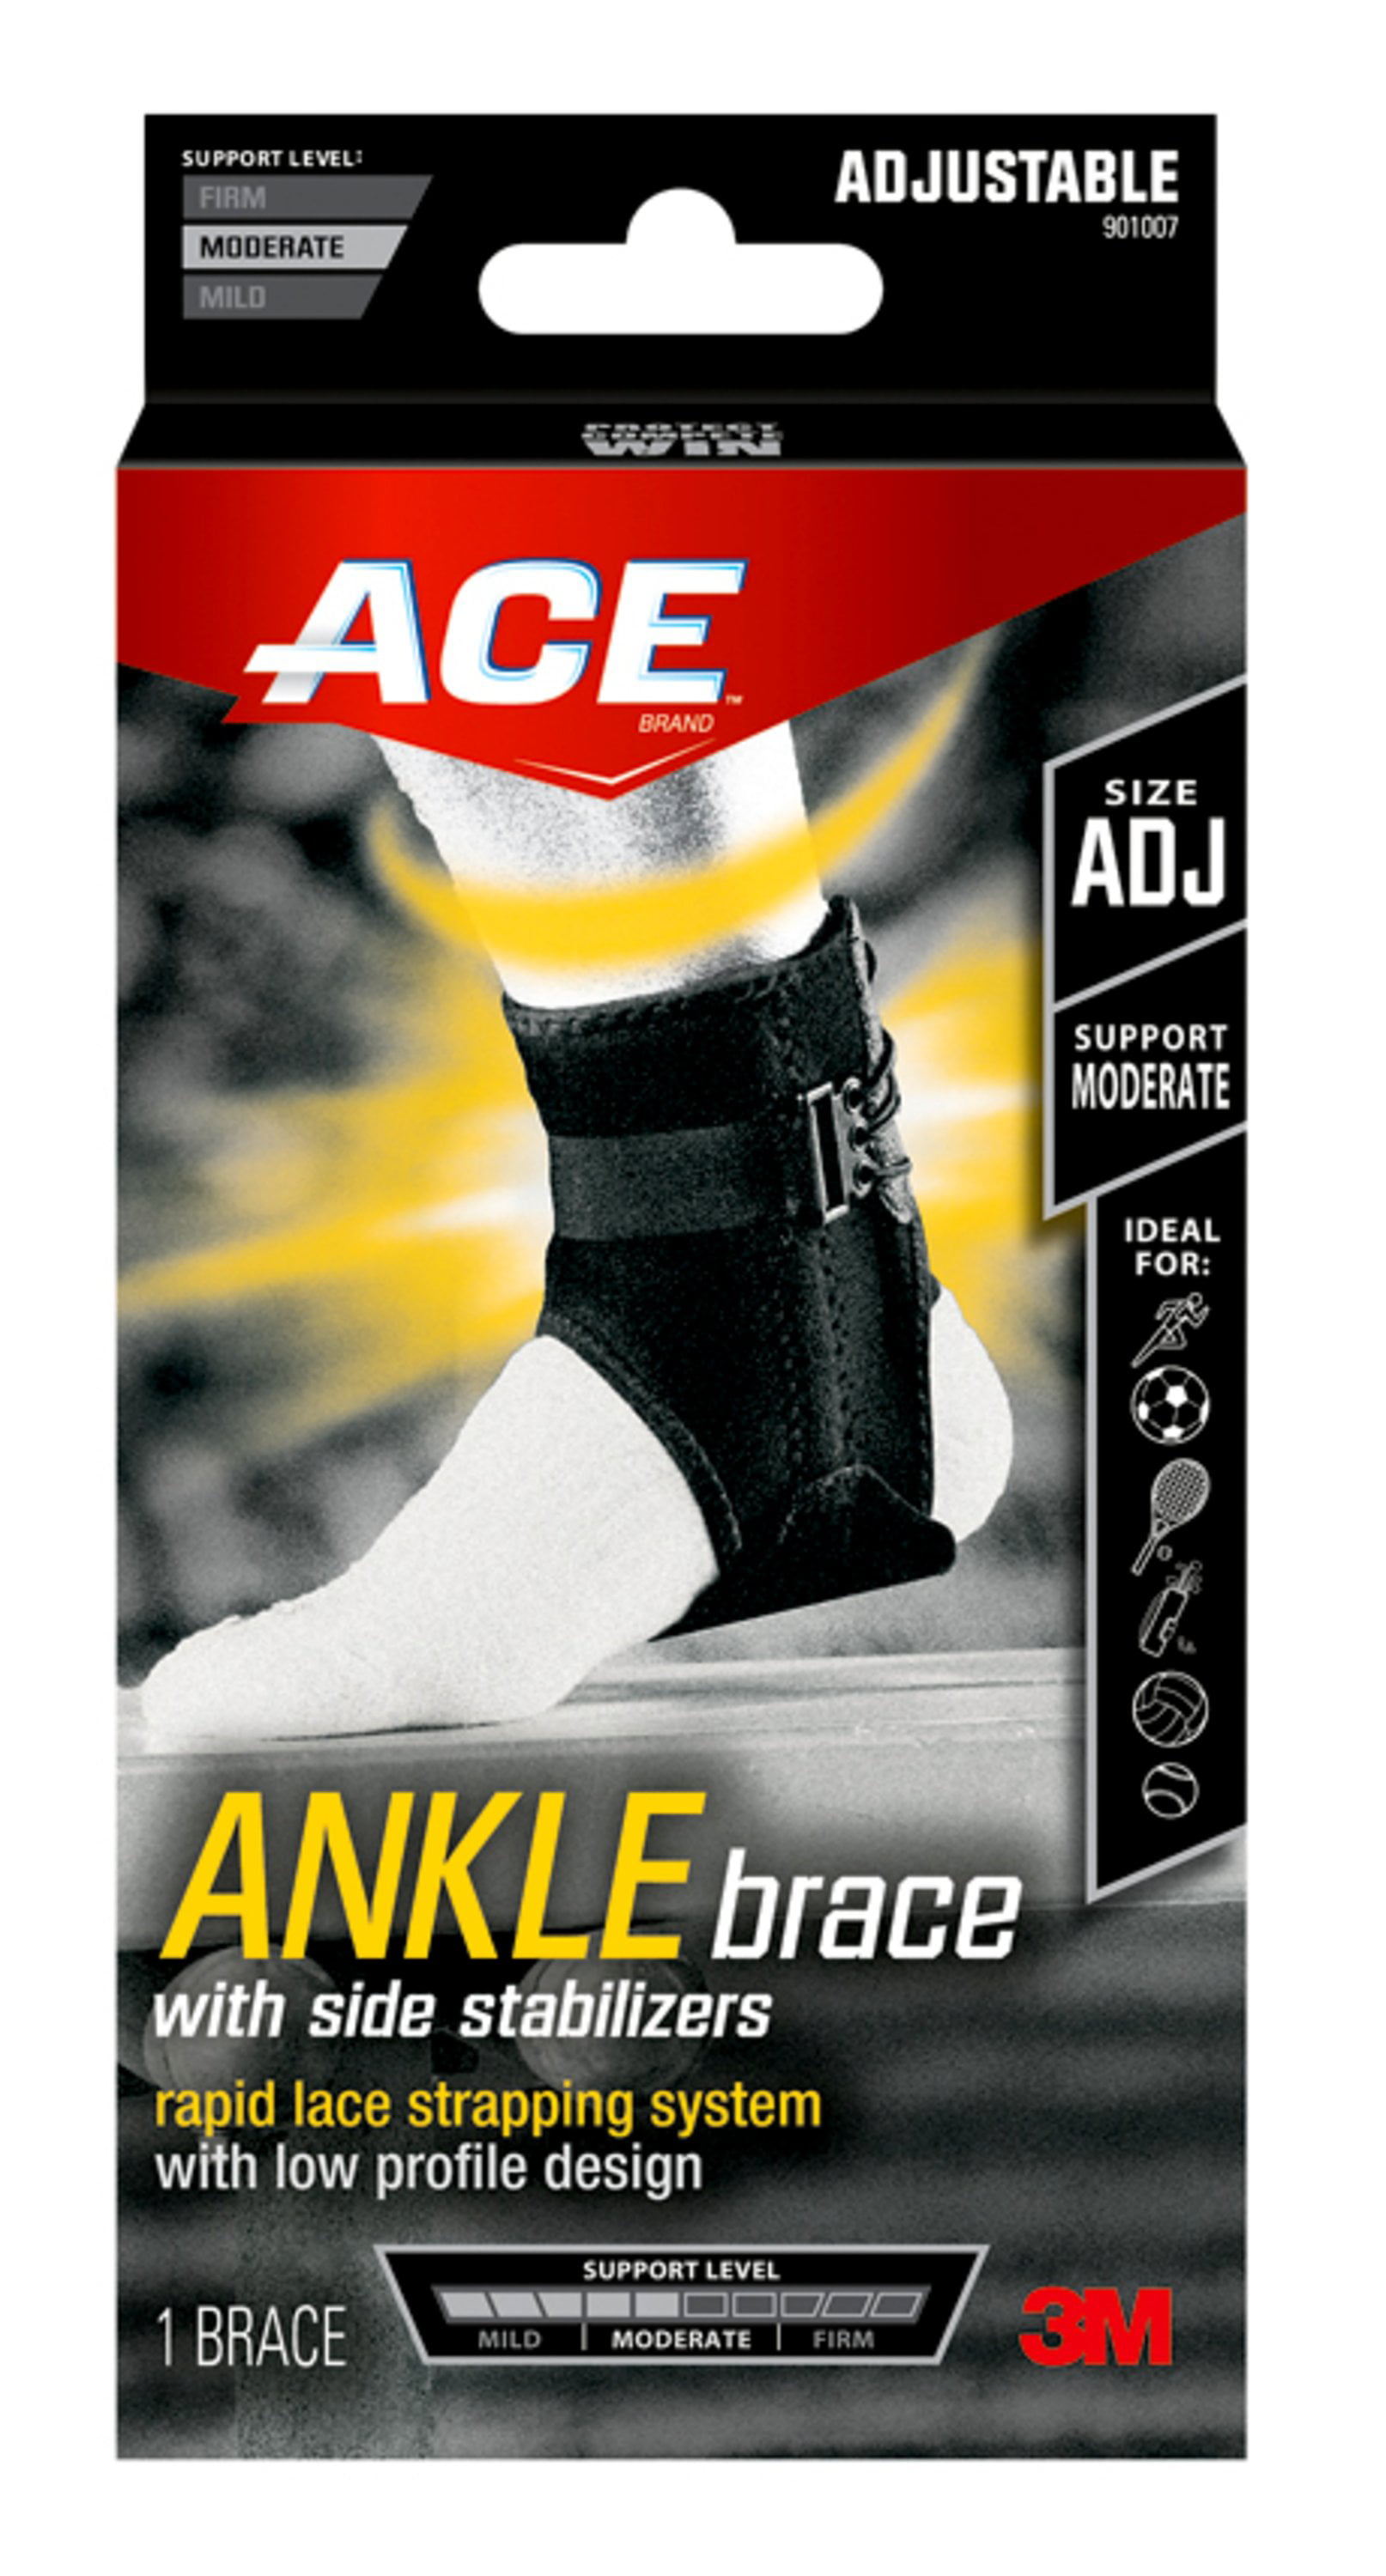 Nike Ankle Wrap Size Chart